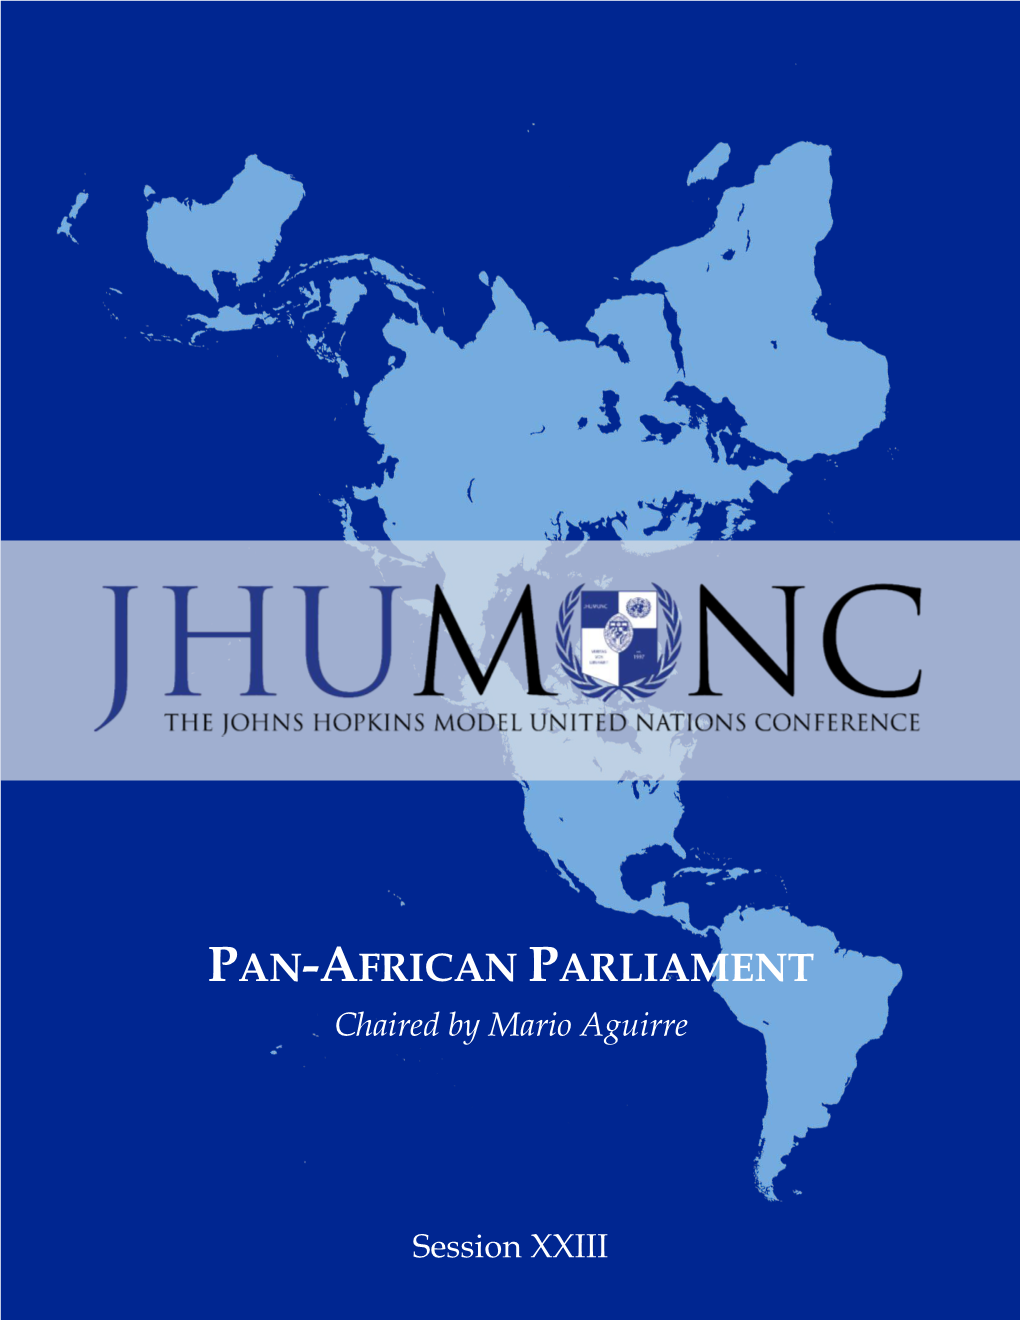 PAN-AFRICAN PARLIAMENT Chaired by Mario Aguirre